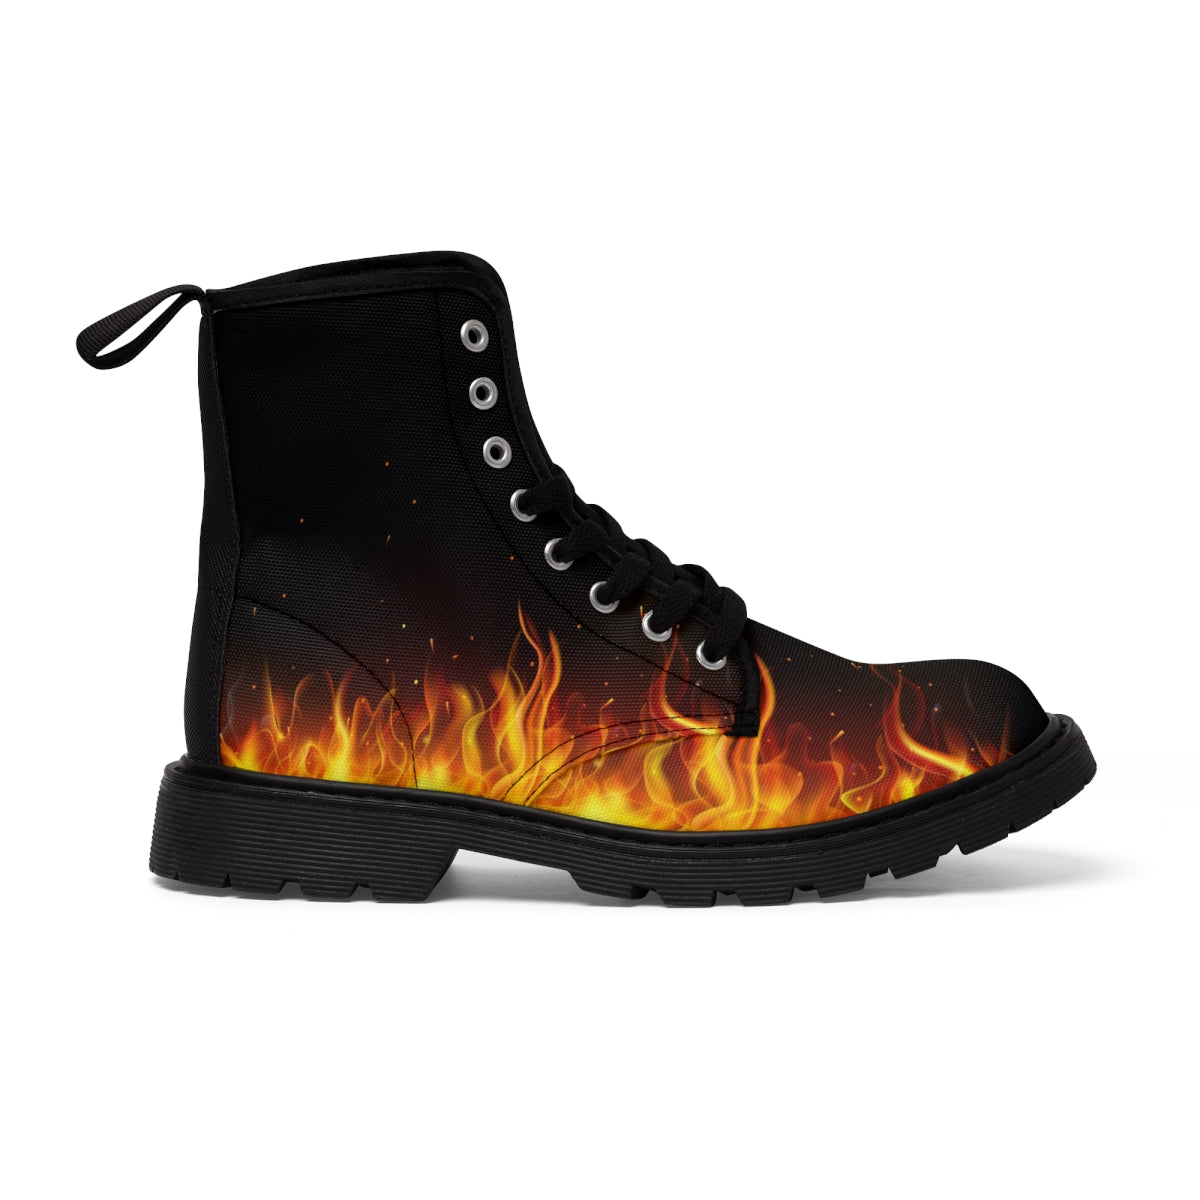 Boots on Fire - Men's Canvas Boots